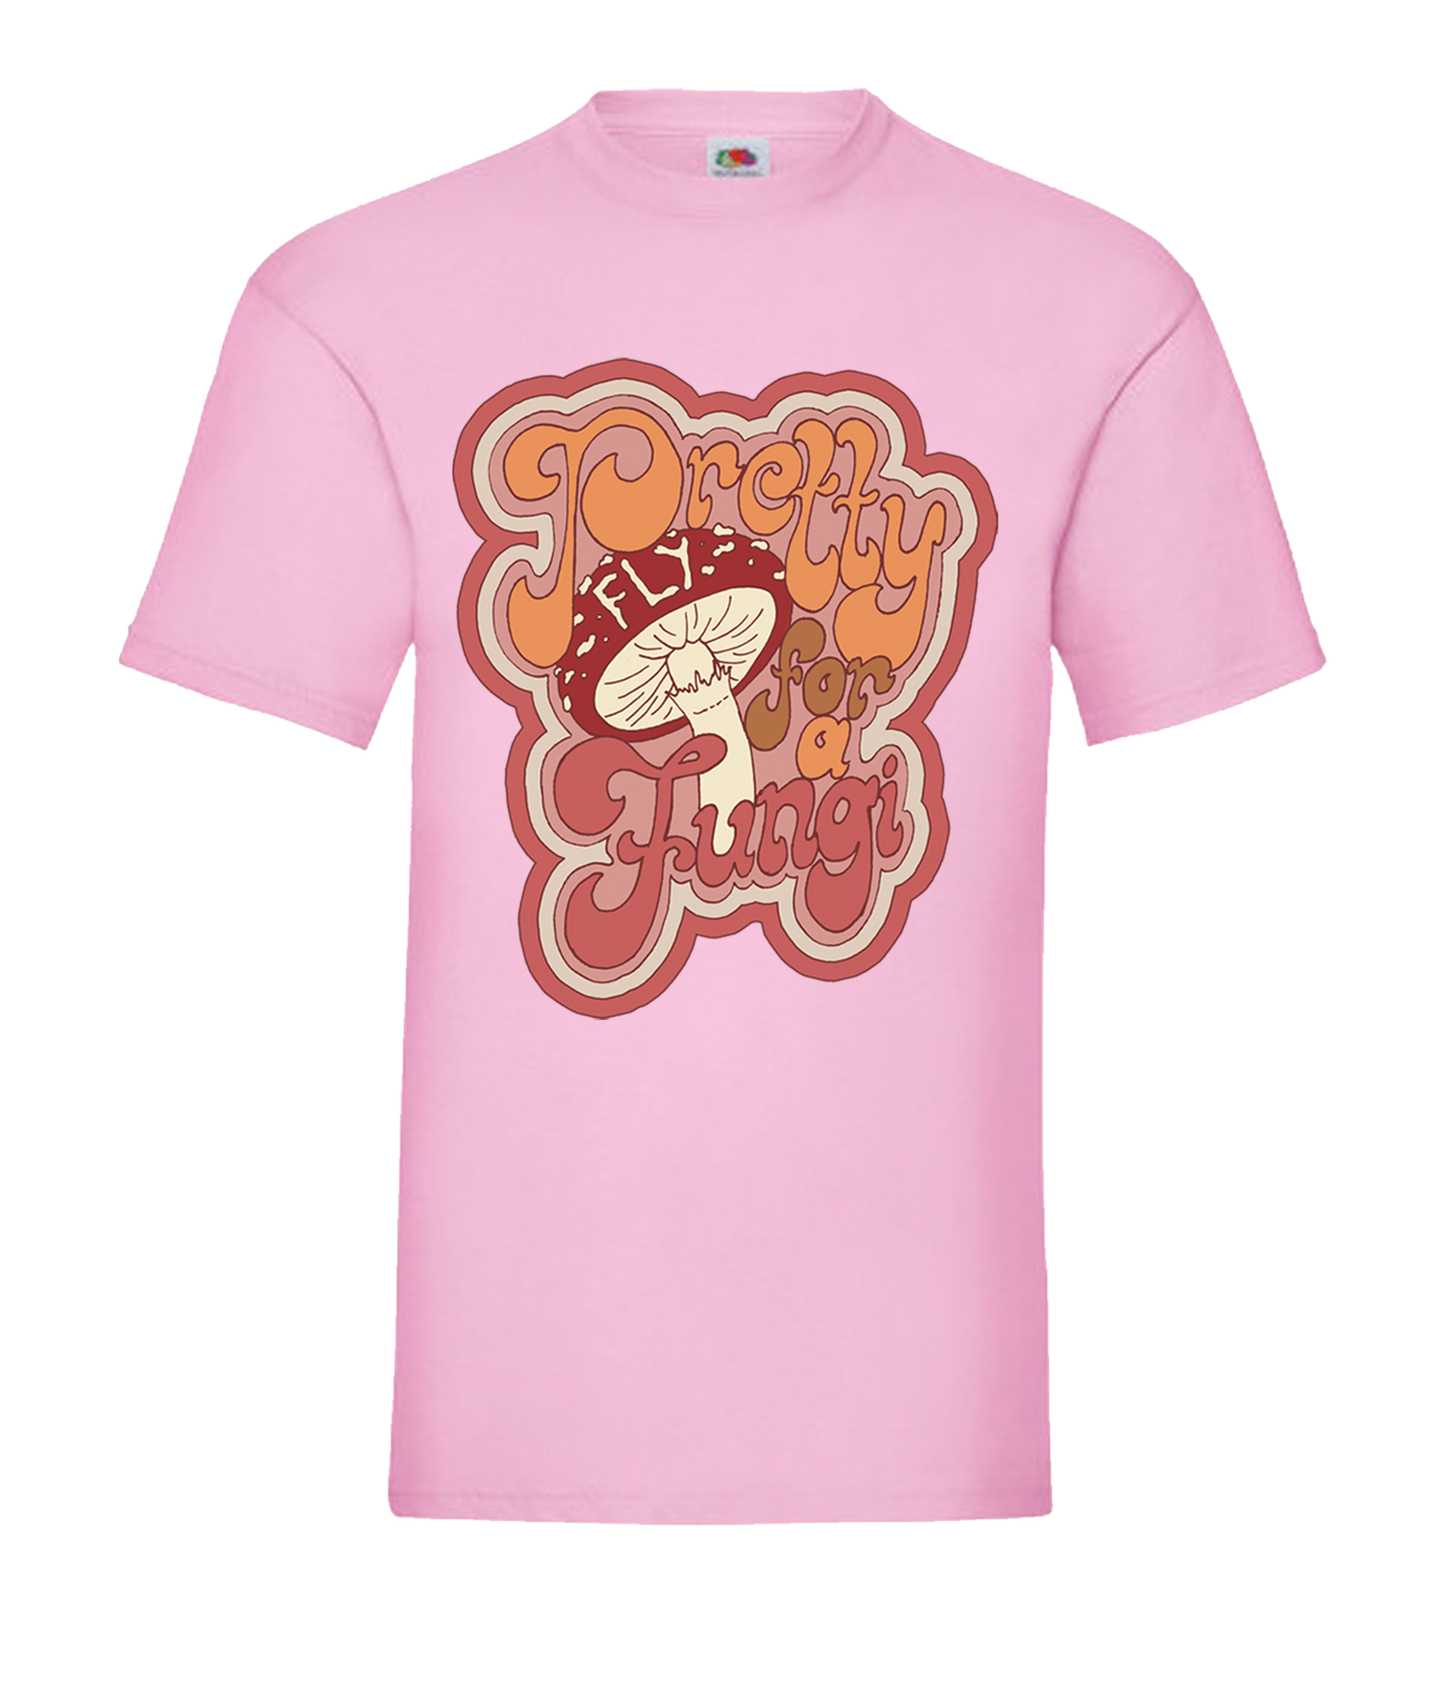 Pretty Fly For A Fungi Unisex T-Shirt - Pink